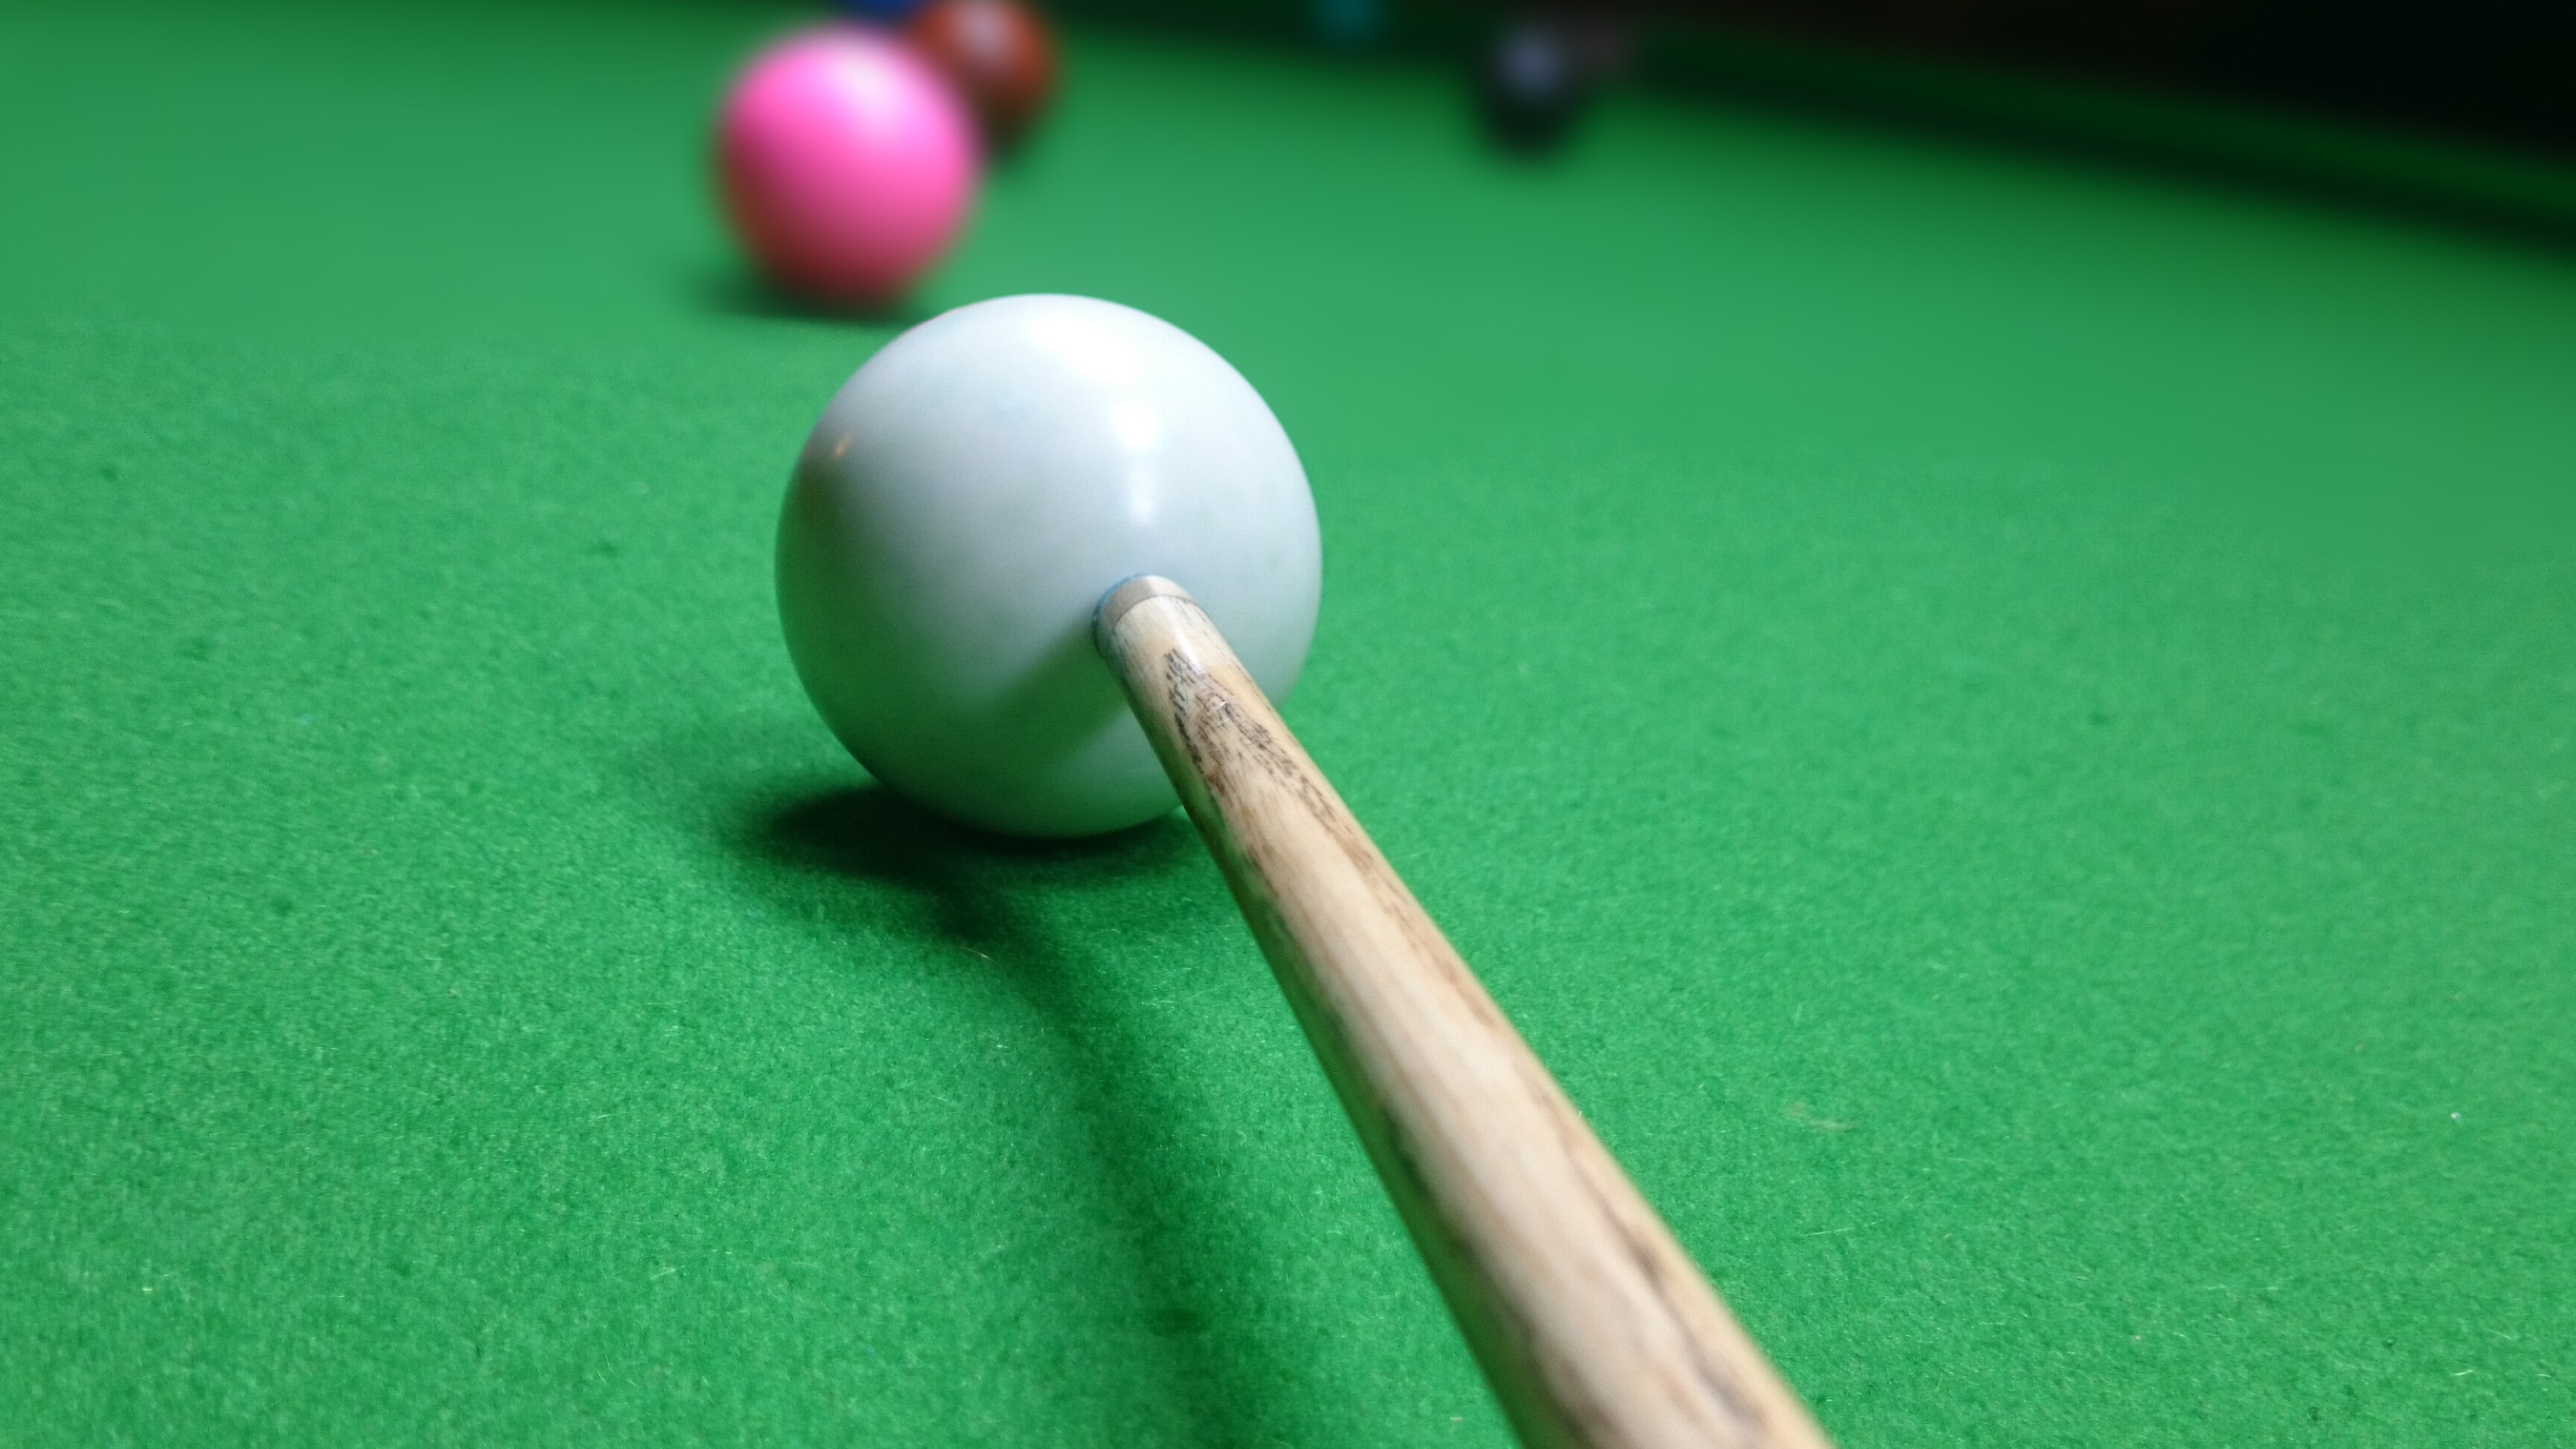 Cue Sports: Pool, A type of sport with a cue stick played on a table with six pockets along the rails, into which balls are deposited. 3840x2160 4K Wallpaper.